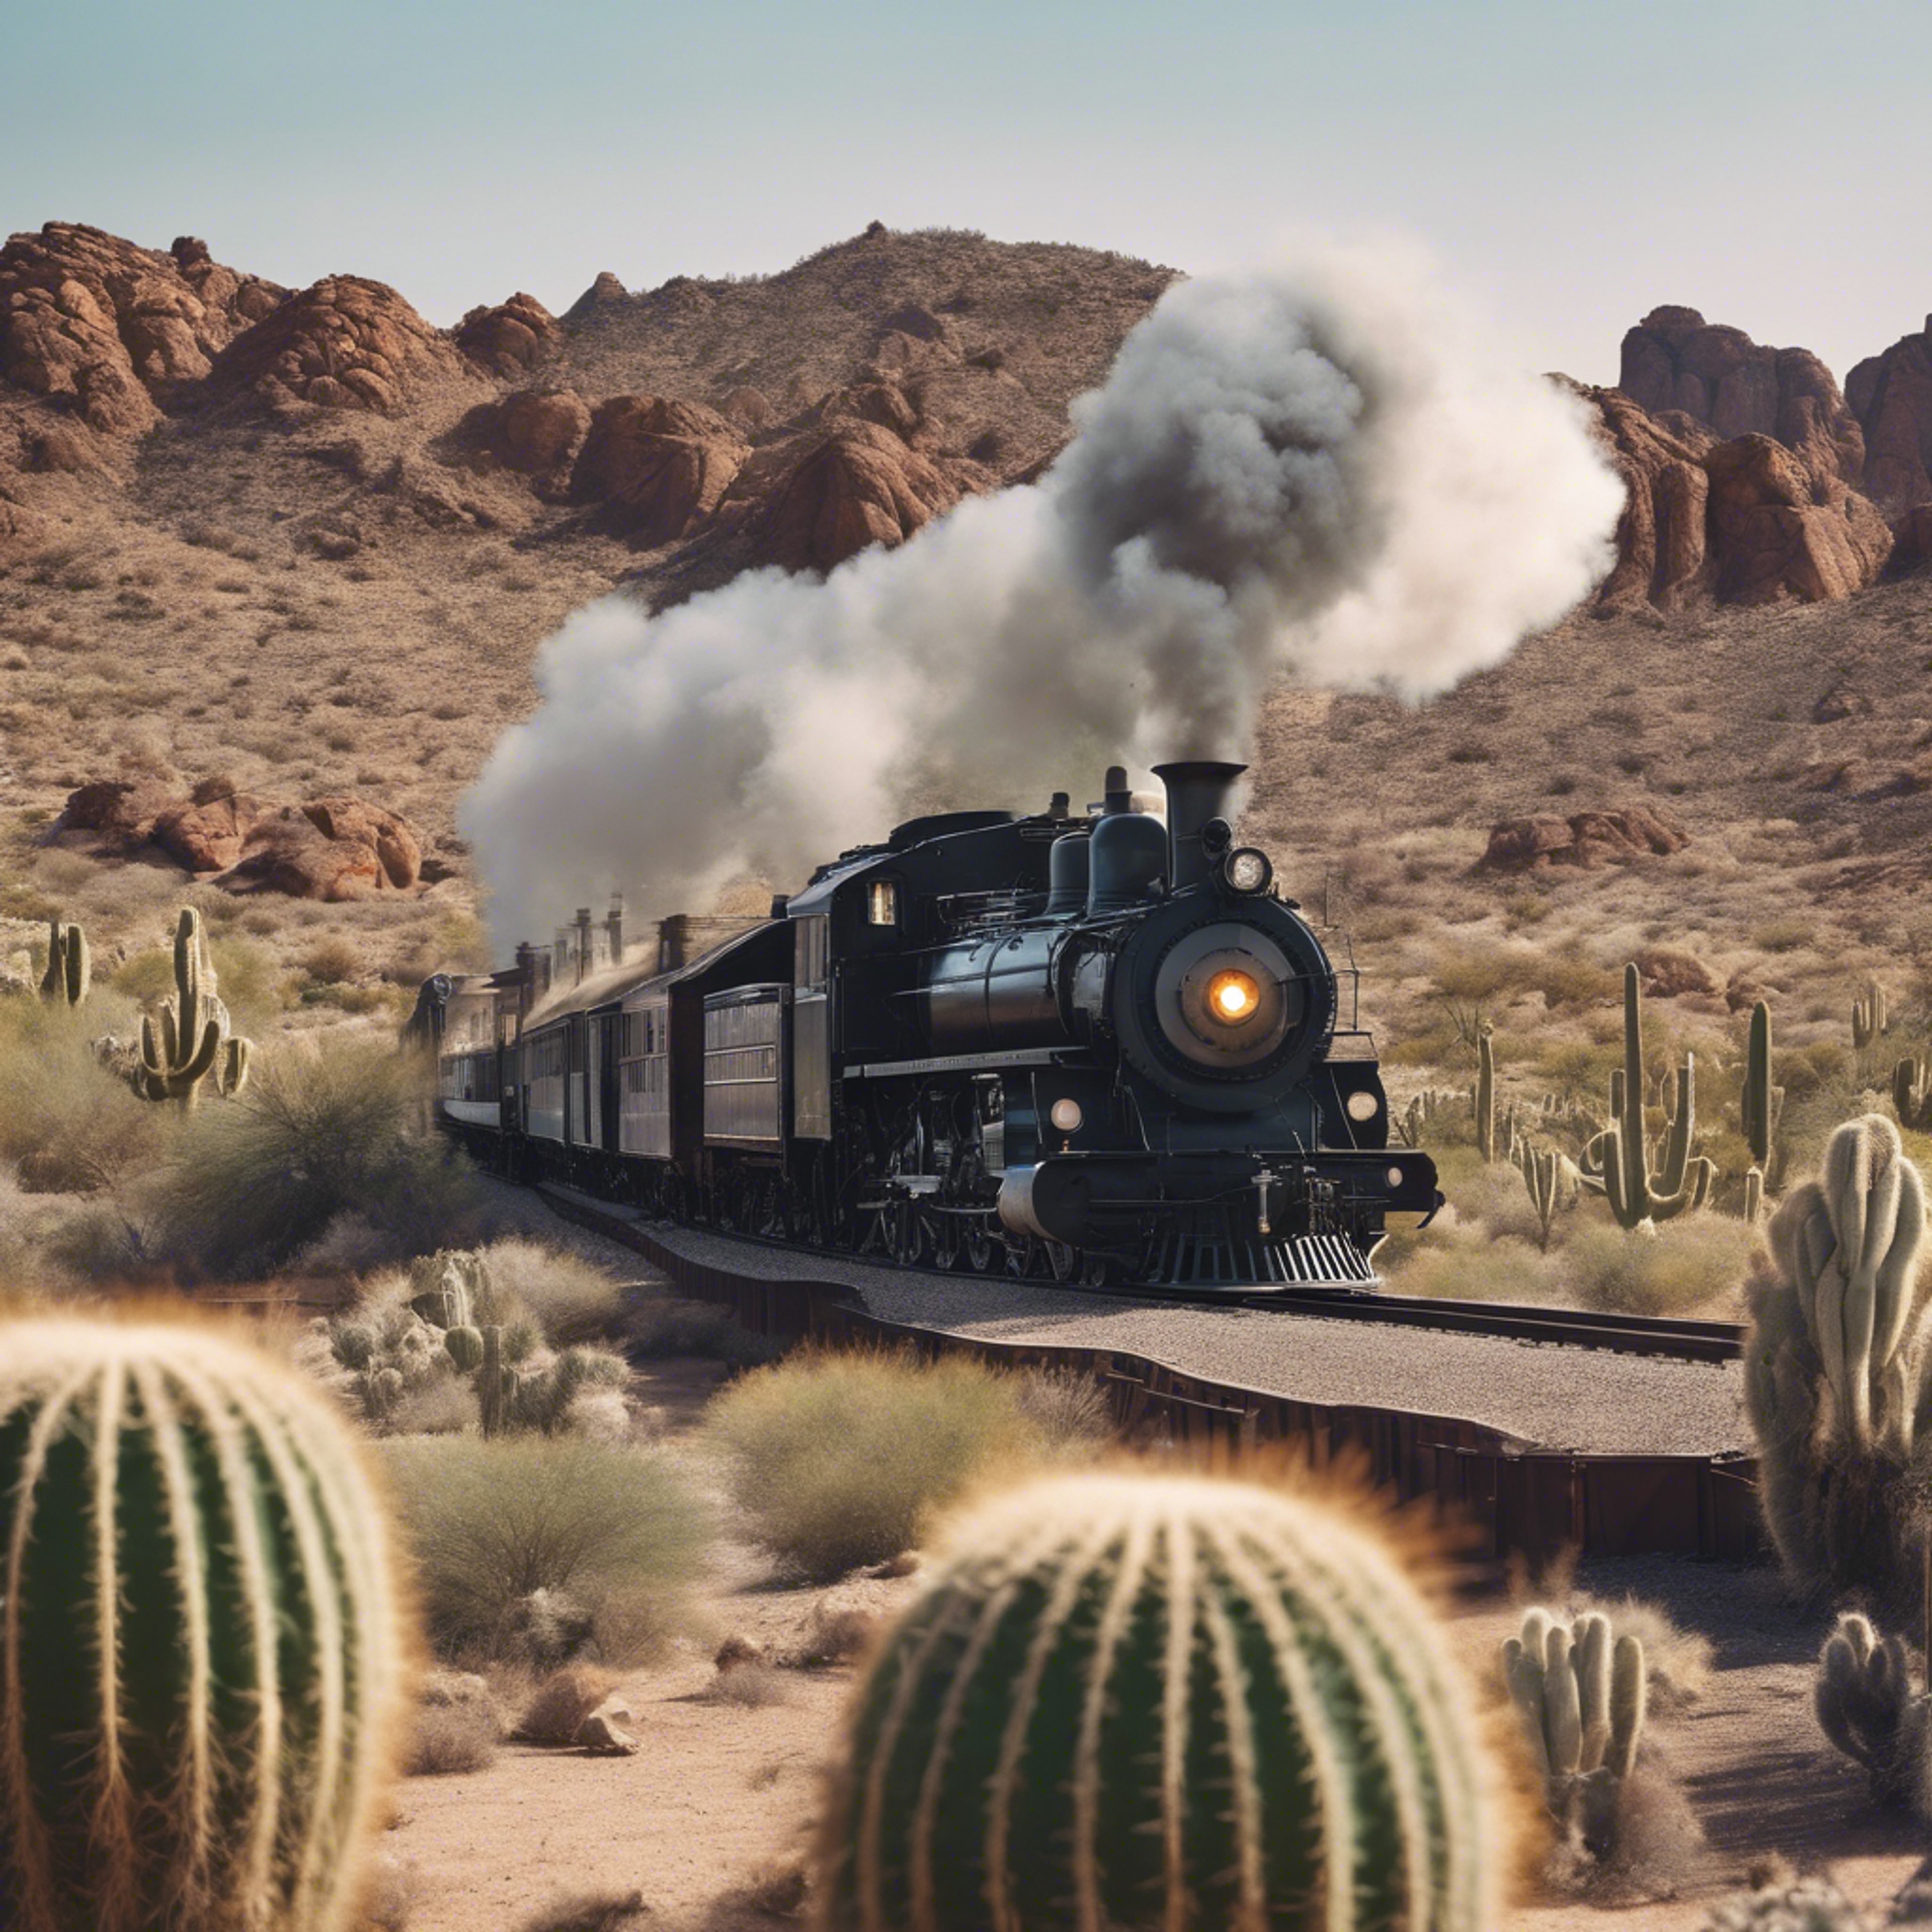 A locomotive steam train rushing across the barren Western landscape surrounded by towering cacti. Wallpaper[f5a4930d44454dd795f5]